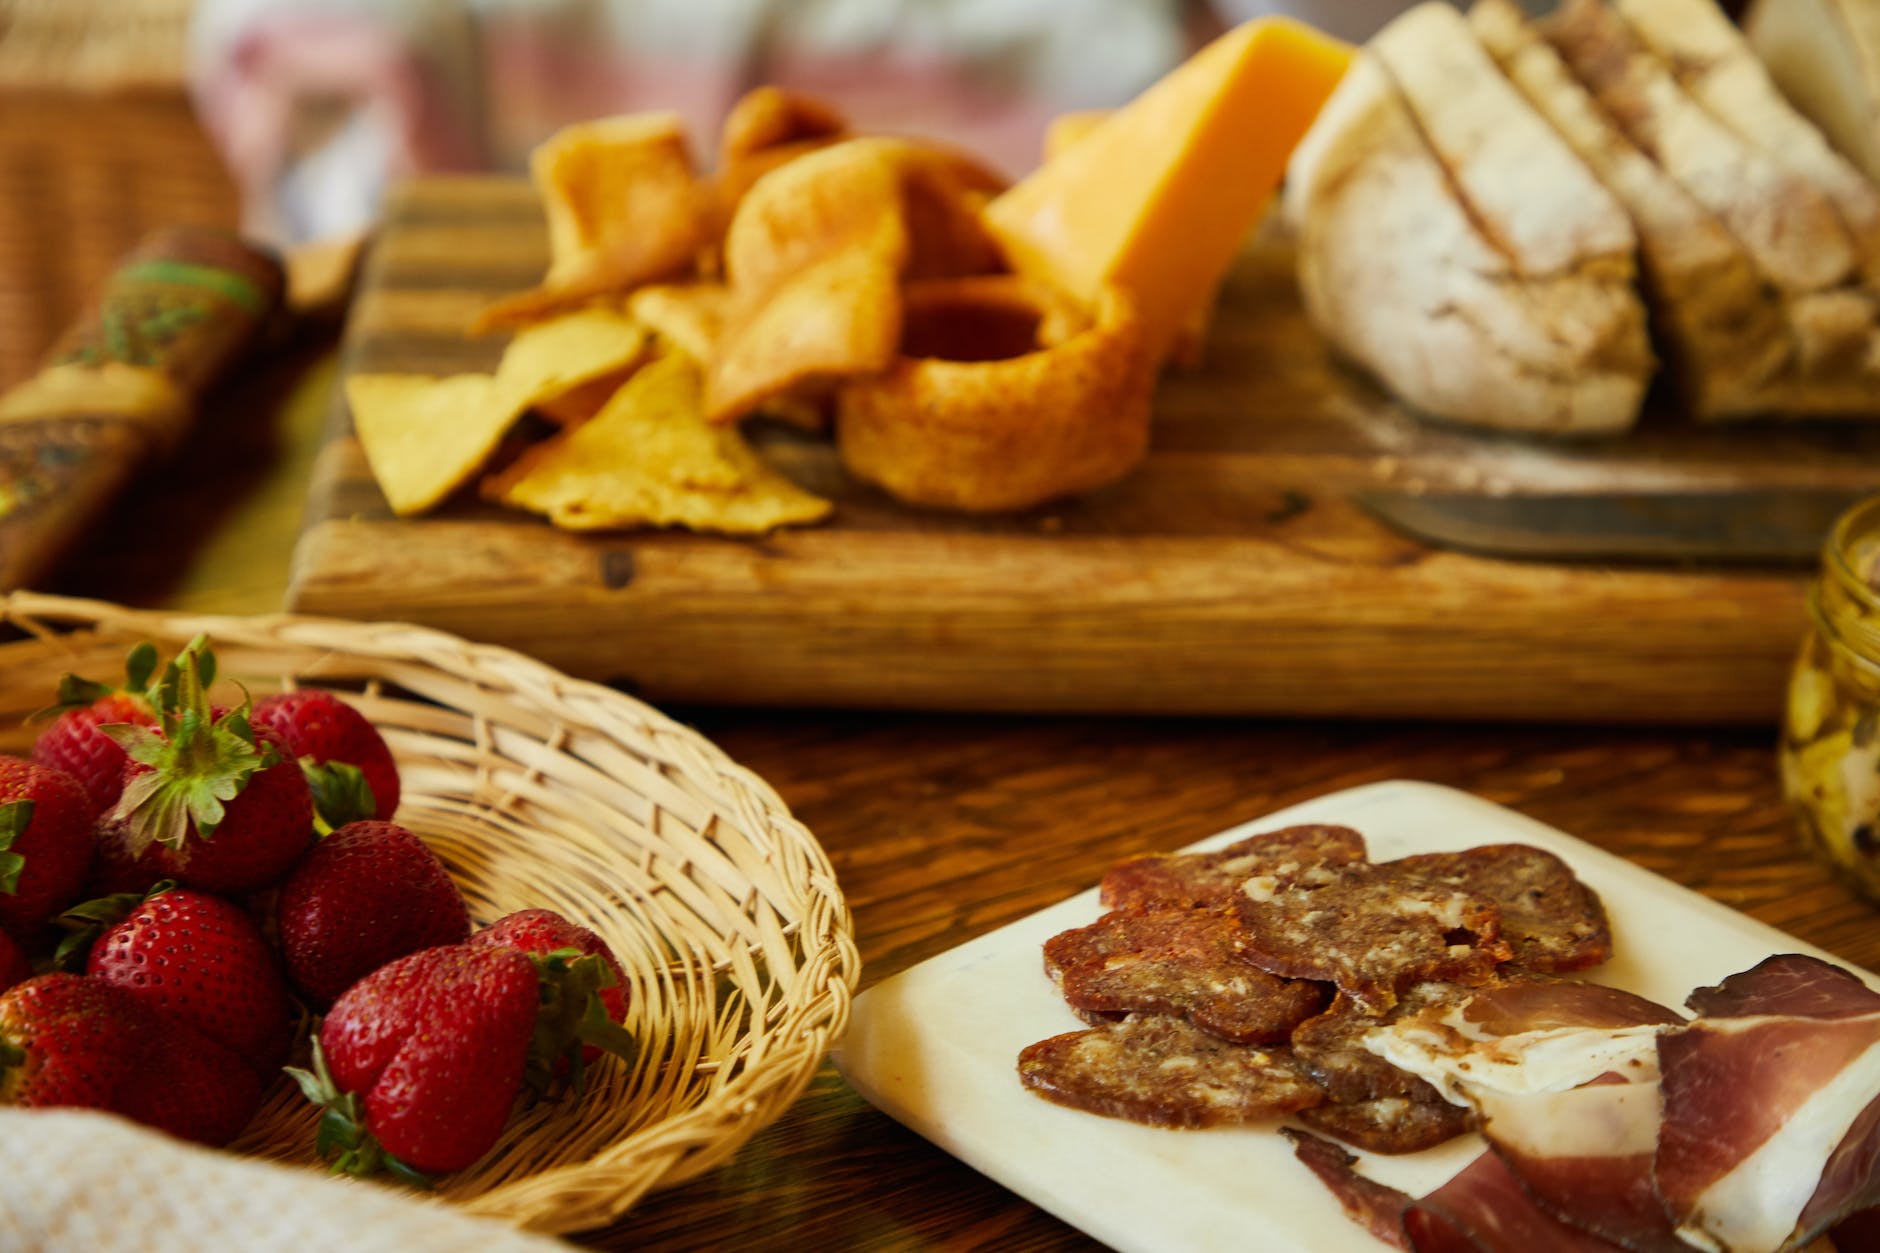 table with cold cuts strawberries and other snacks